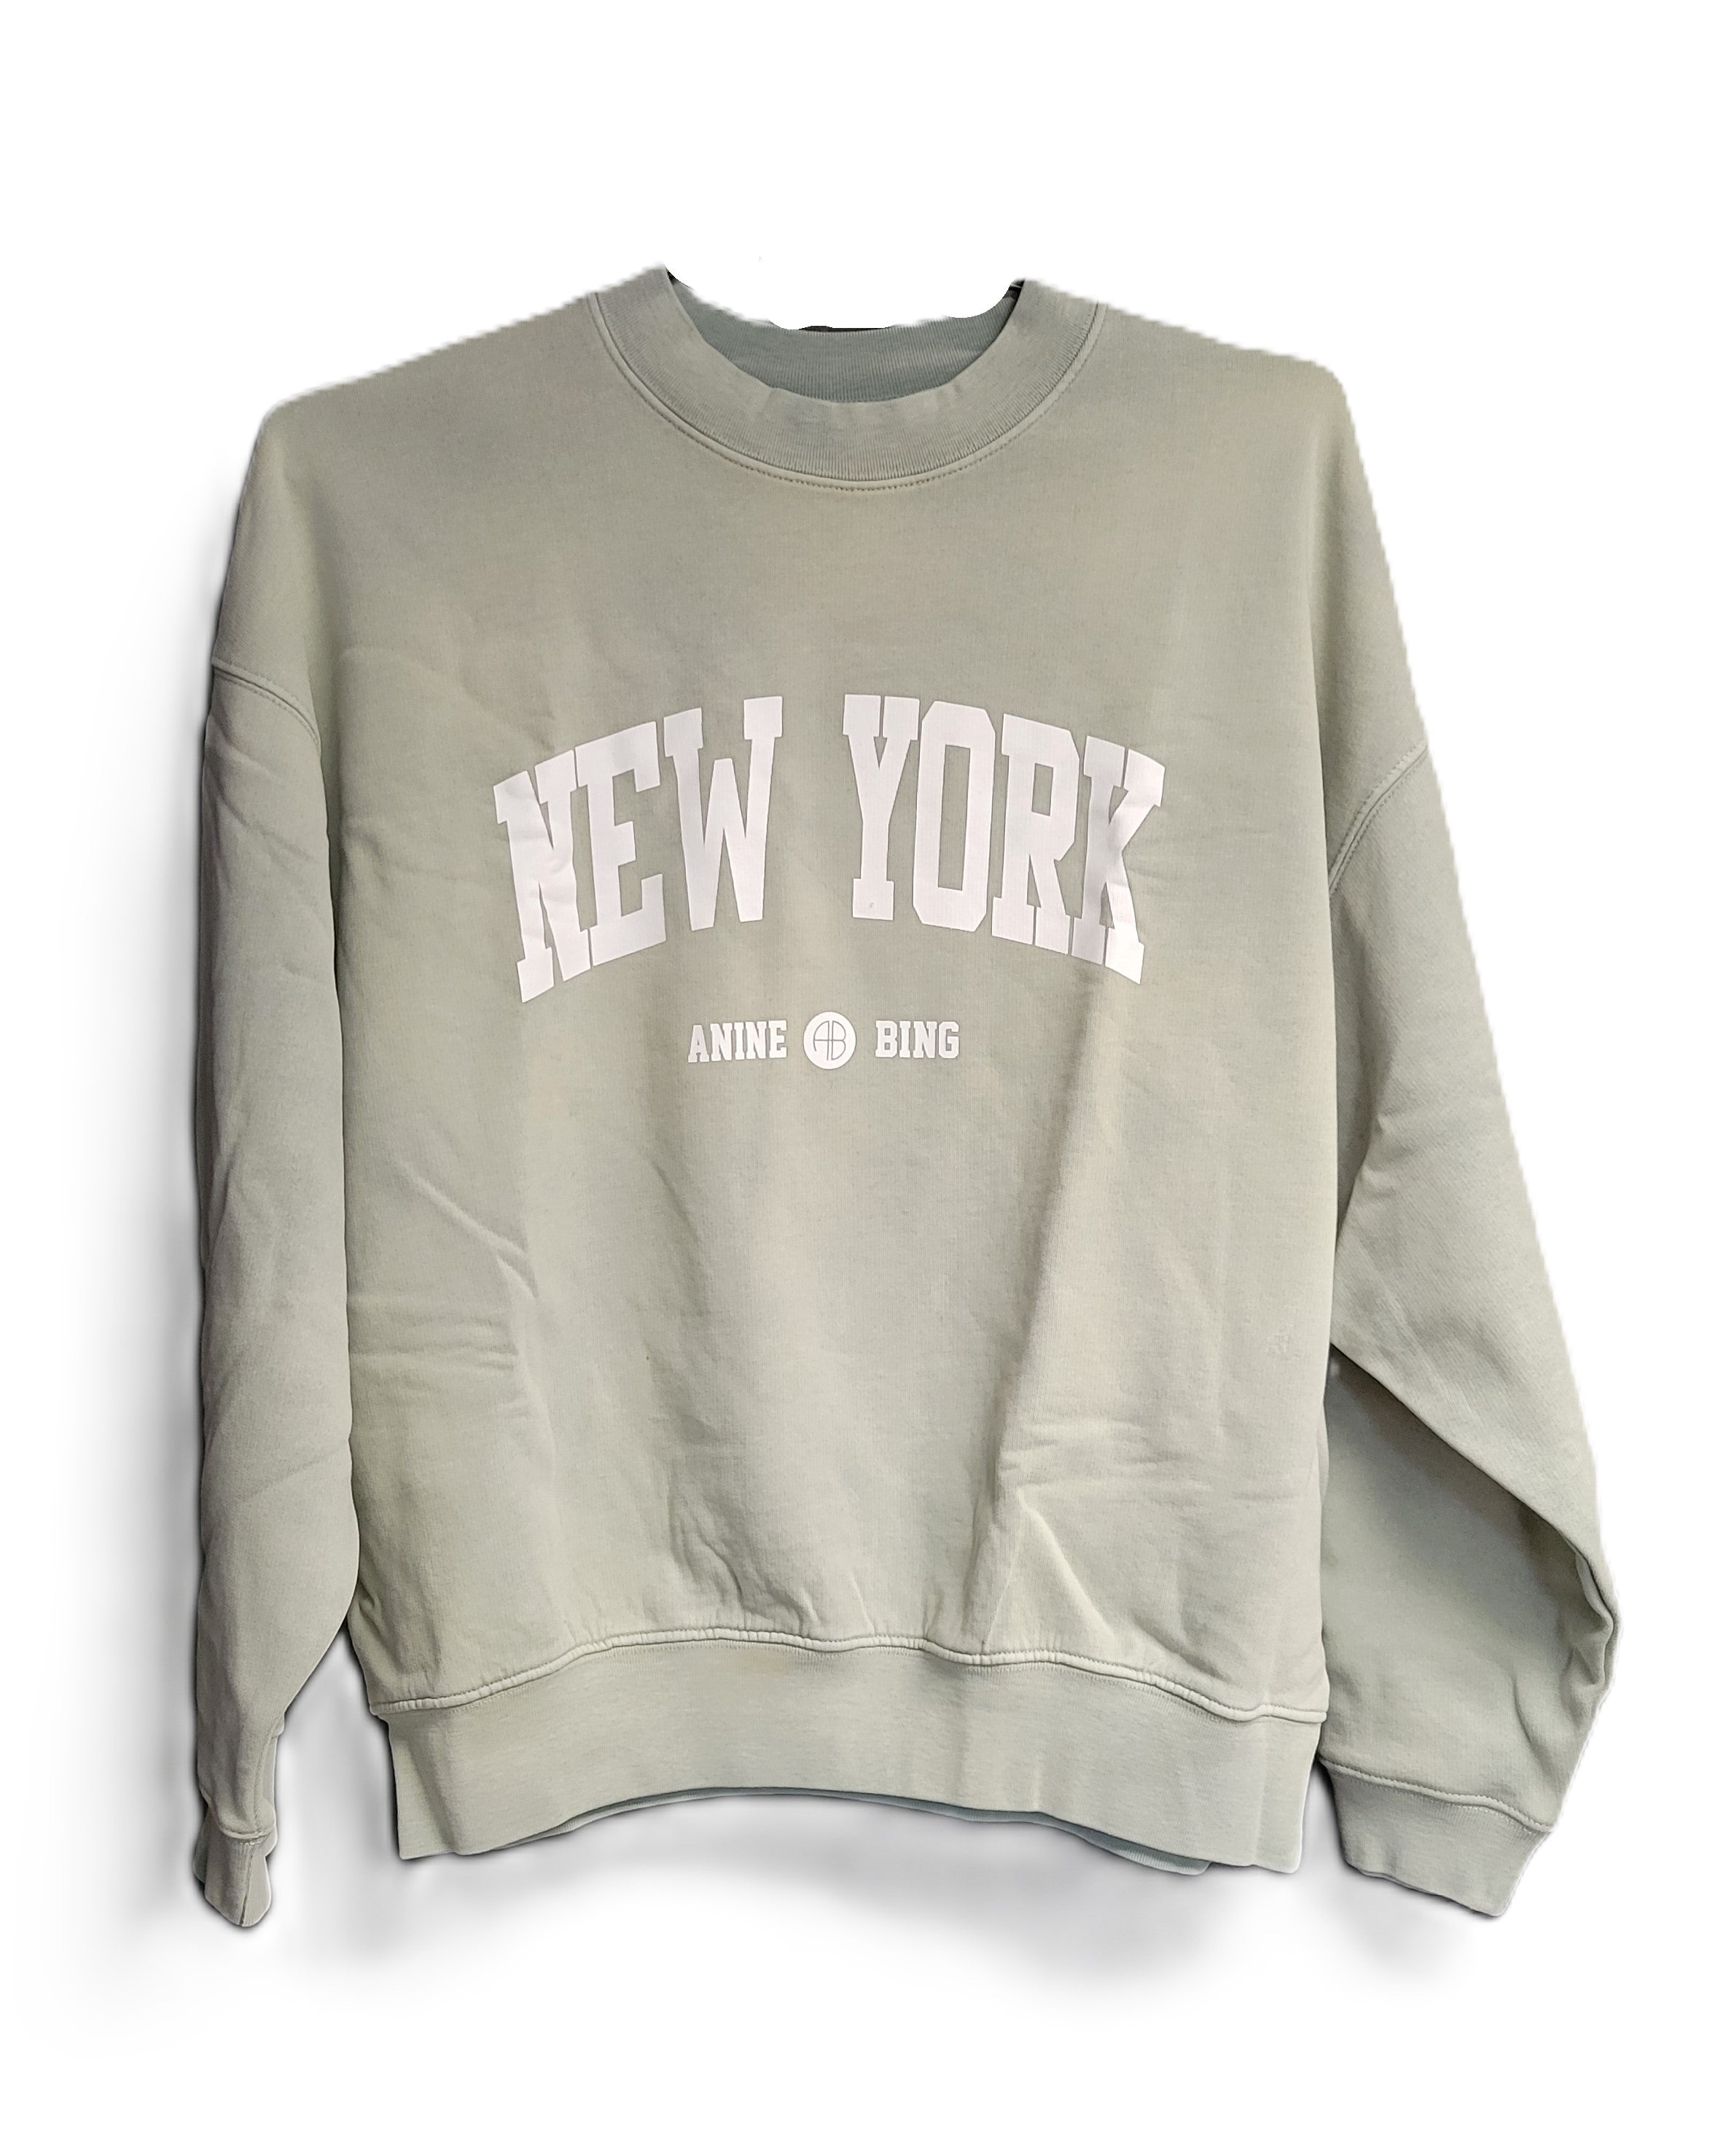 ANINE BING Jaci University New York in Washed Faded Seafoam Size Small